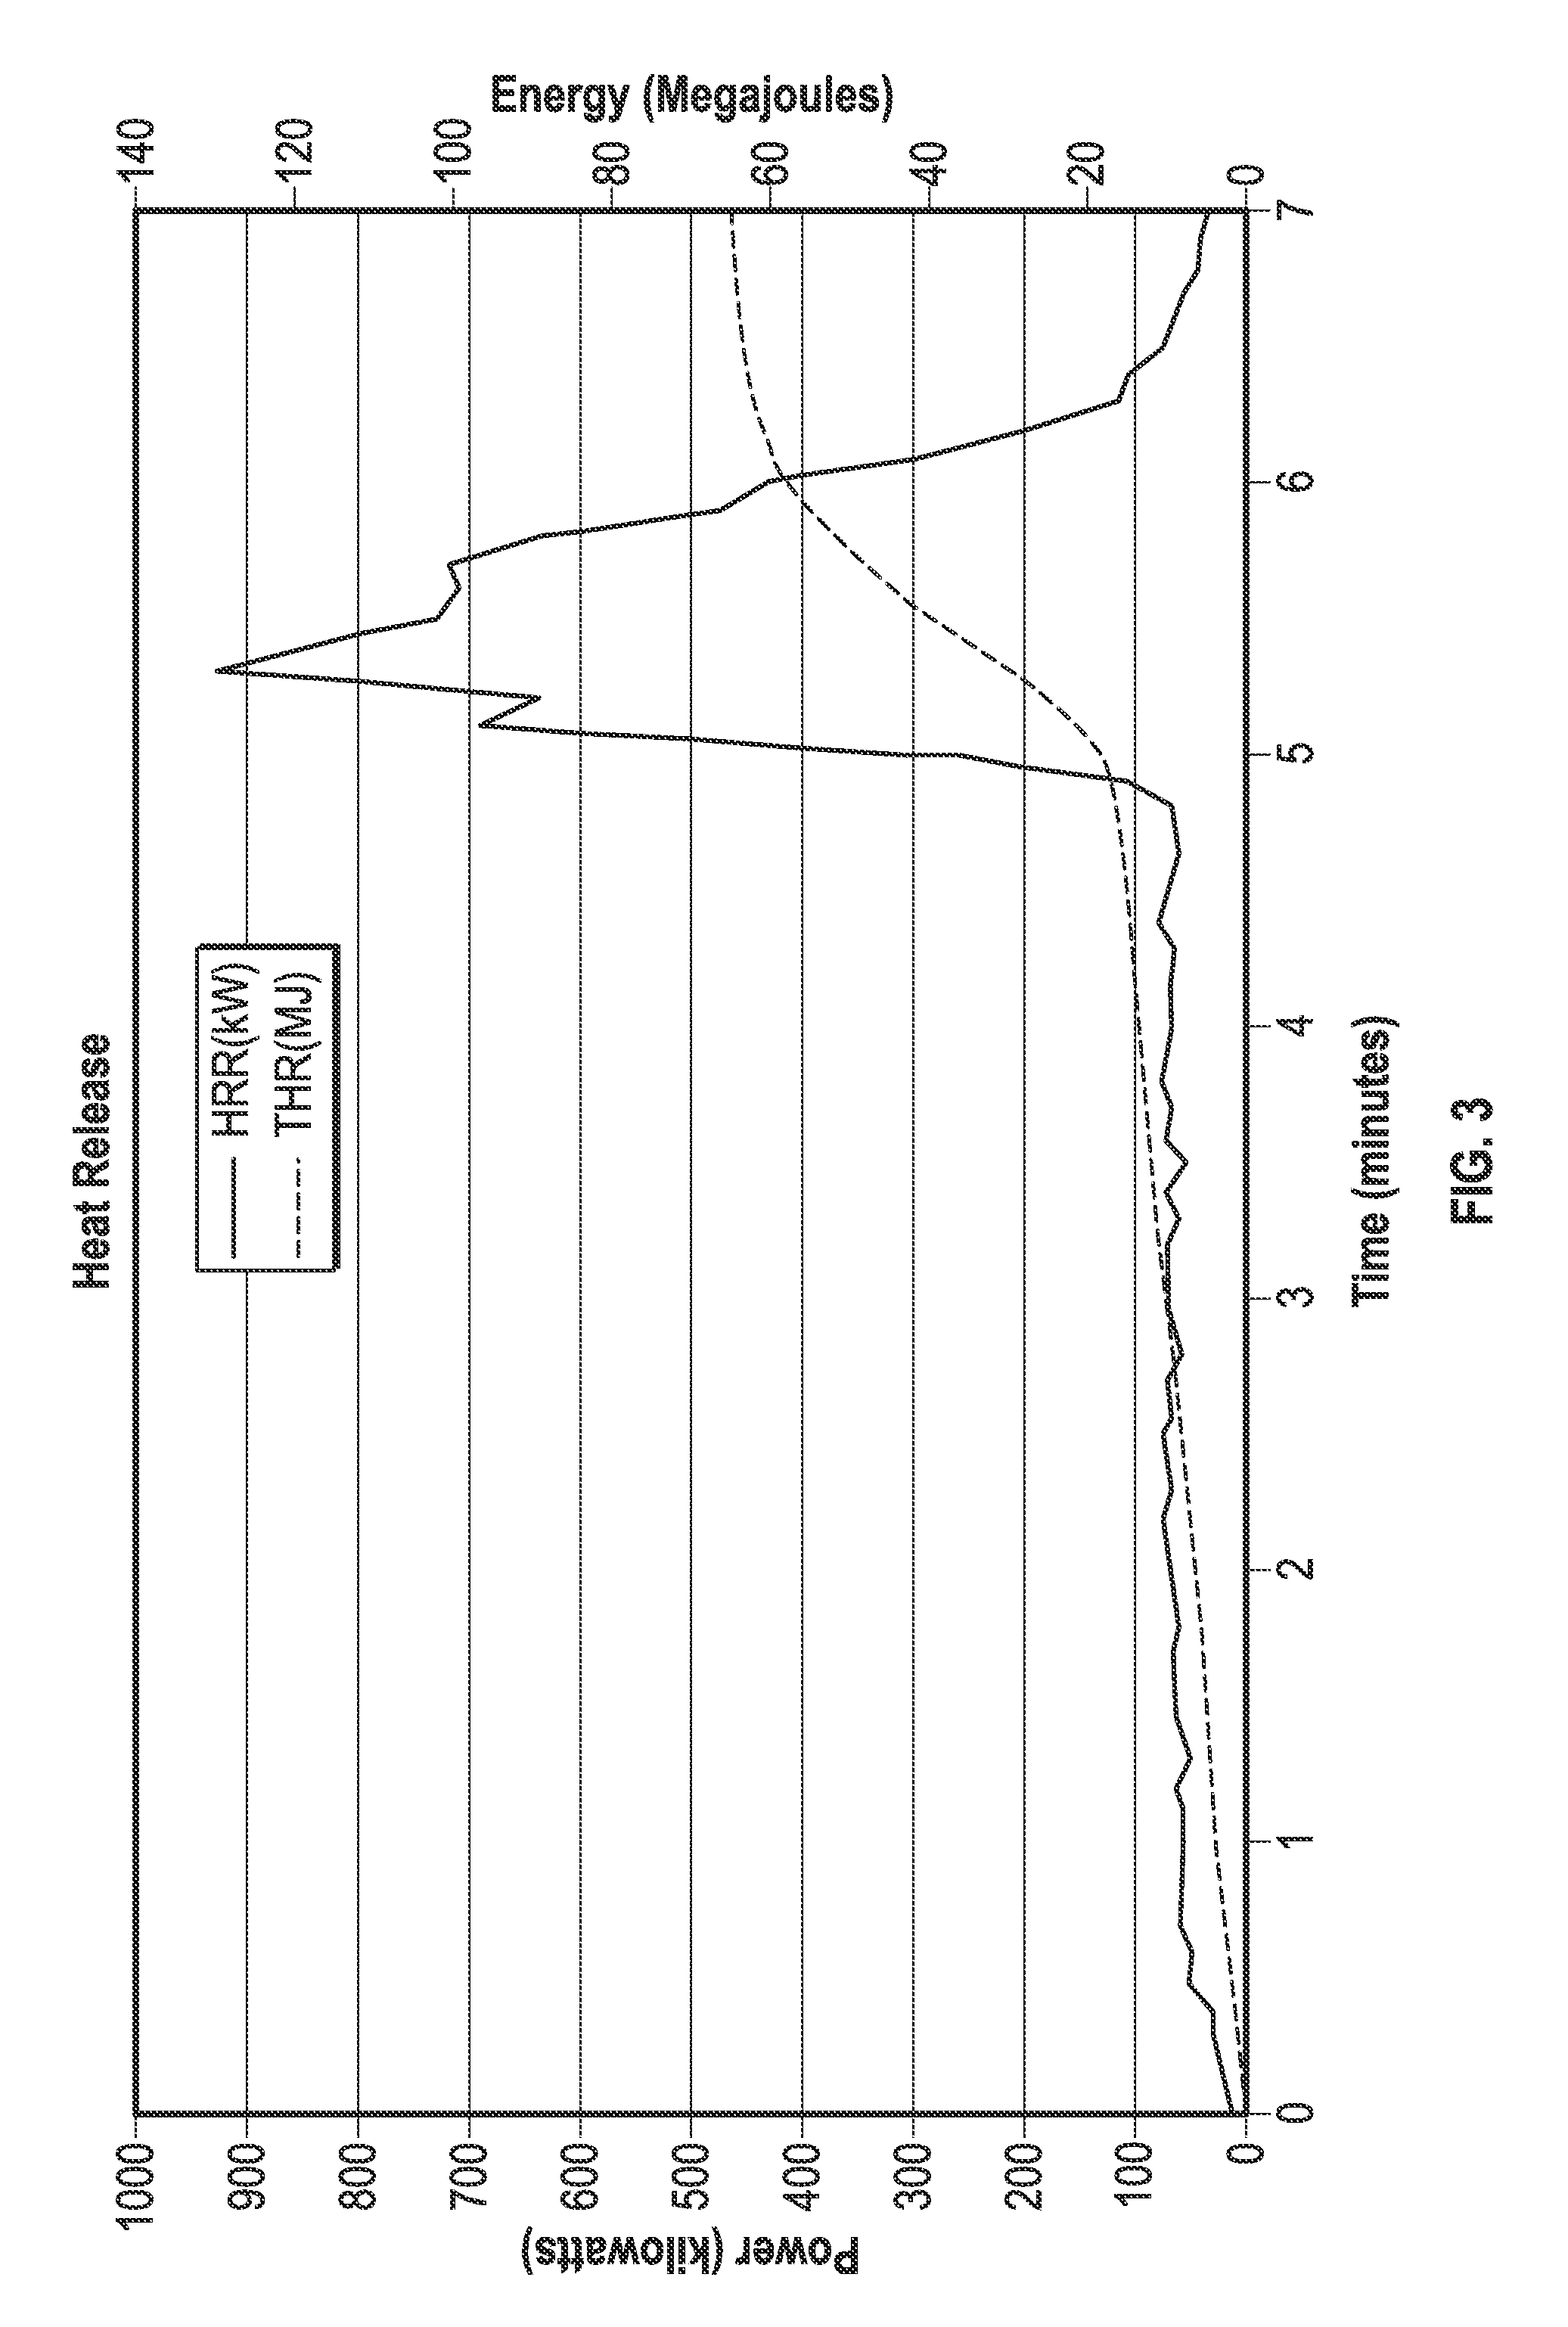 Sugar-Based Polyurethanes, Methods for Their Preparation, and Methods of Use Thereof